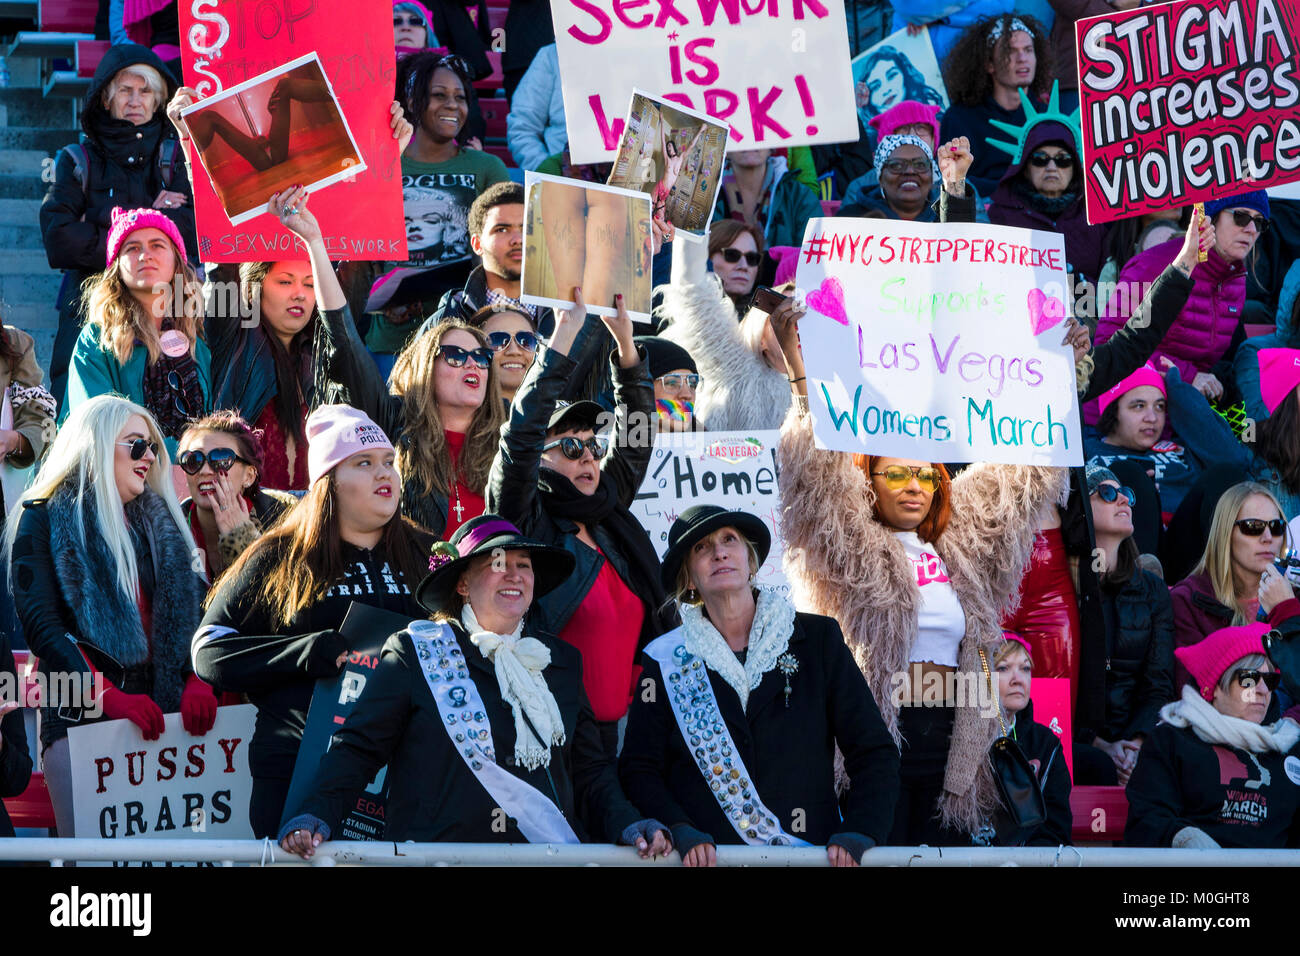 Las Vegas, NV, USA. 21st Jan, 2018. Atmosphere at the Women's March “Power to the Polls” rally in LAs Vegas, Nevada on January 21, 2018. Credit: Damairs Carter/Media Punch/Alamy Live News Stock Photo